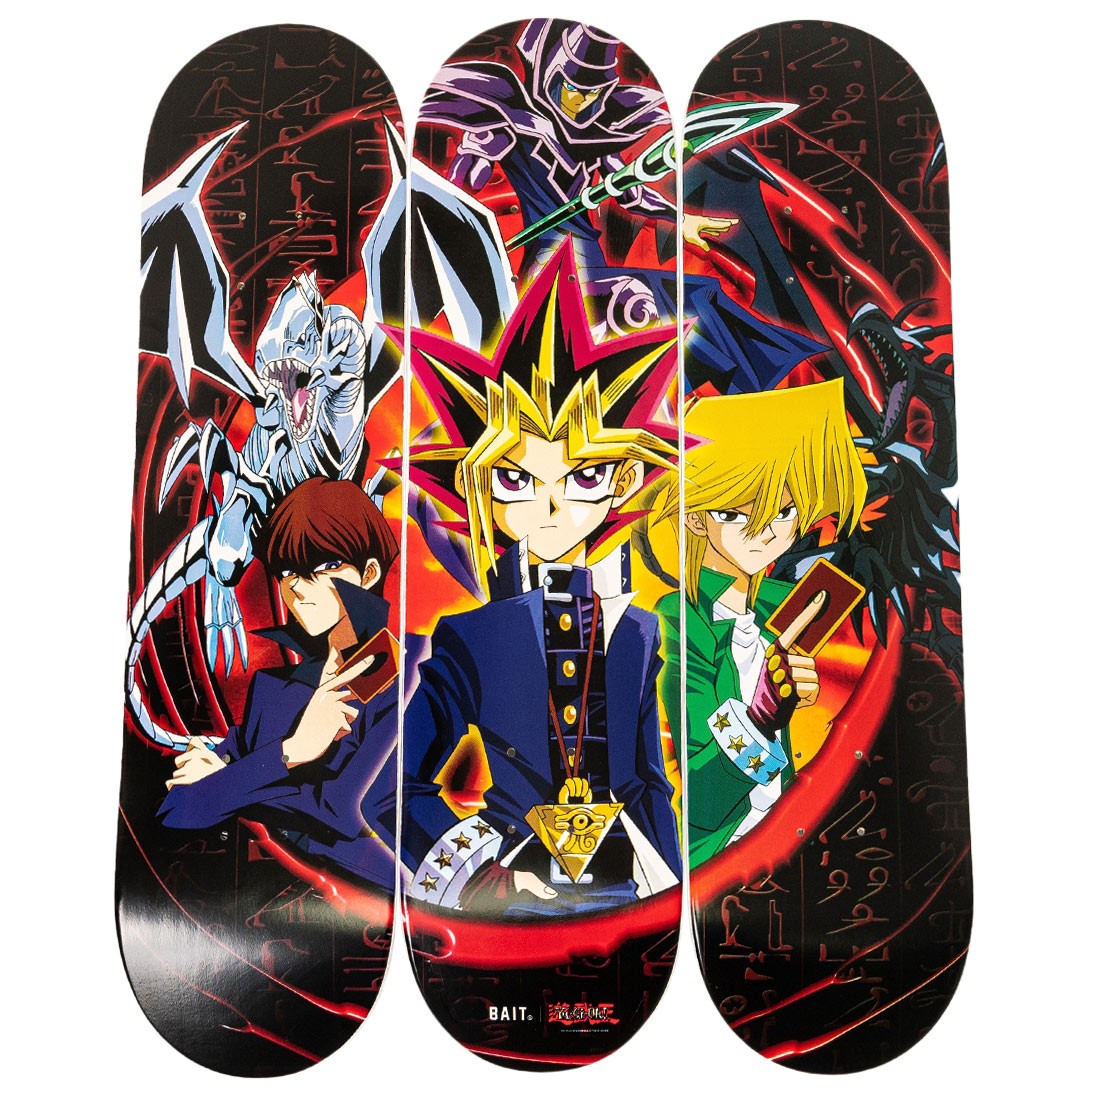 Imm-cnrShops x One Piece Skateboard Deck Set of 3 - Limited Out of 300 black